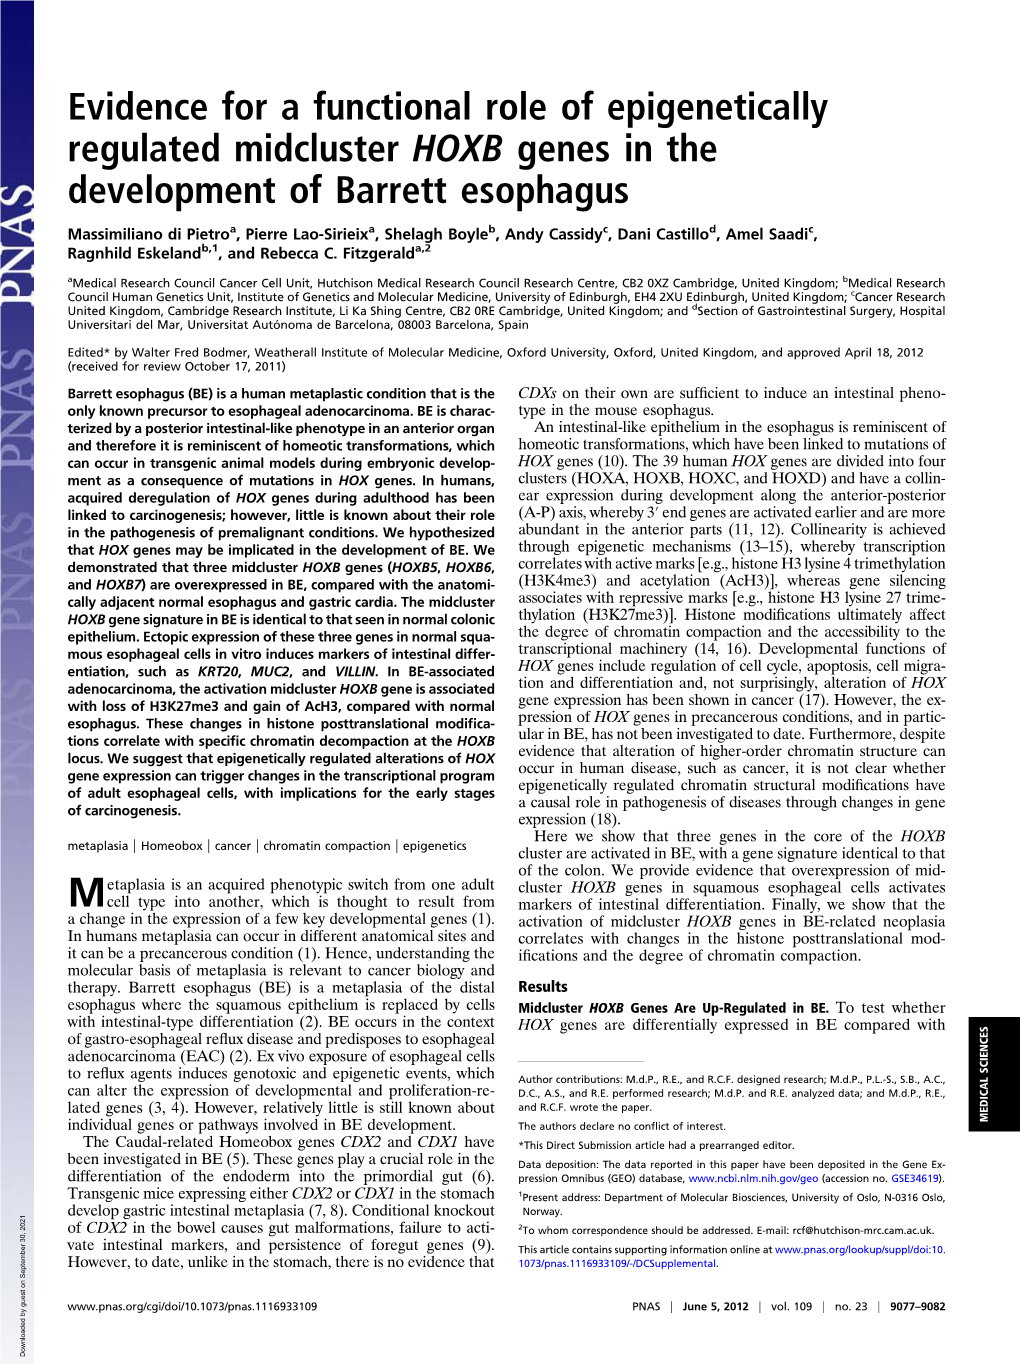 Evidence for a Functional Role of Epigenetically Regulated Midcluster HOXB Genes in the Development of Barrett Esophagus